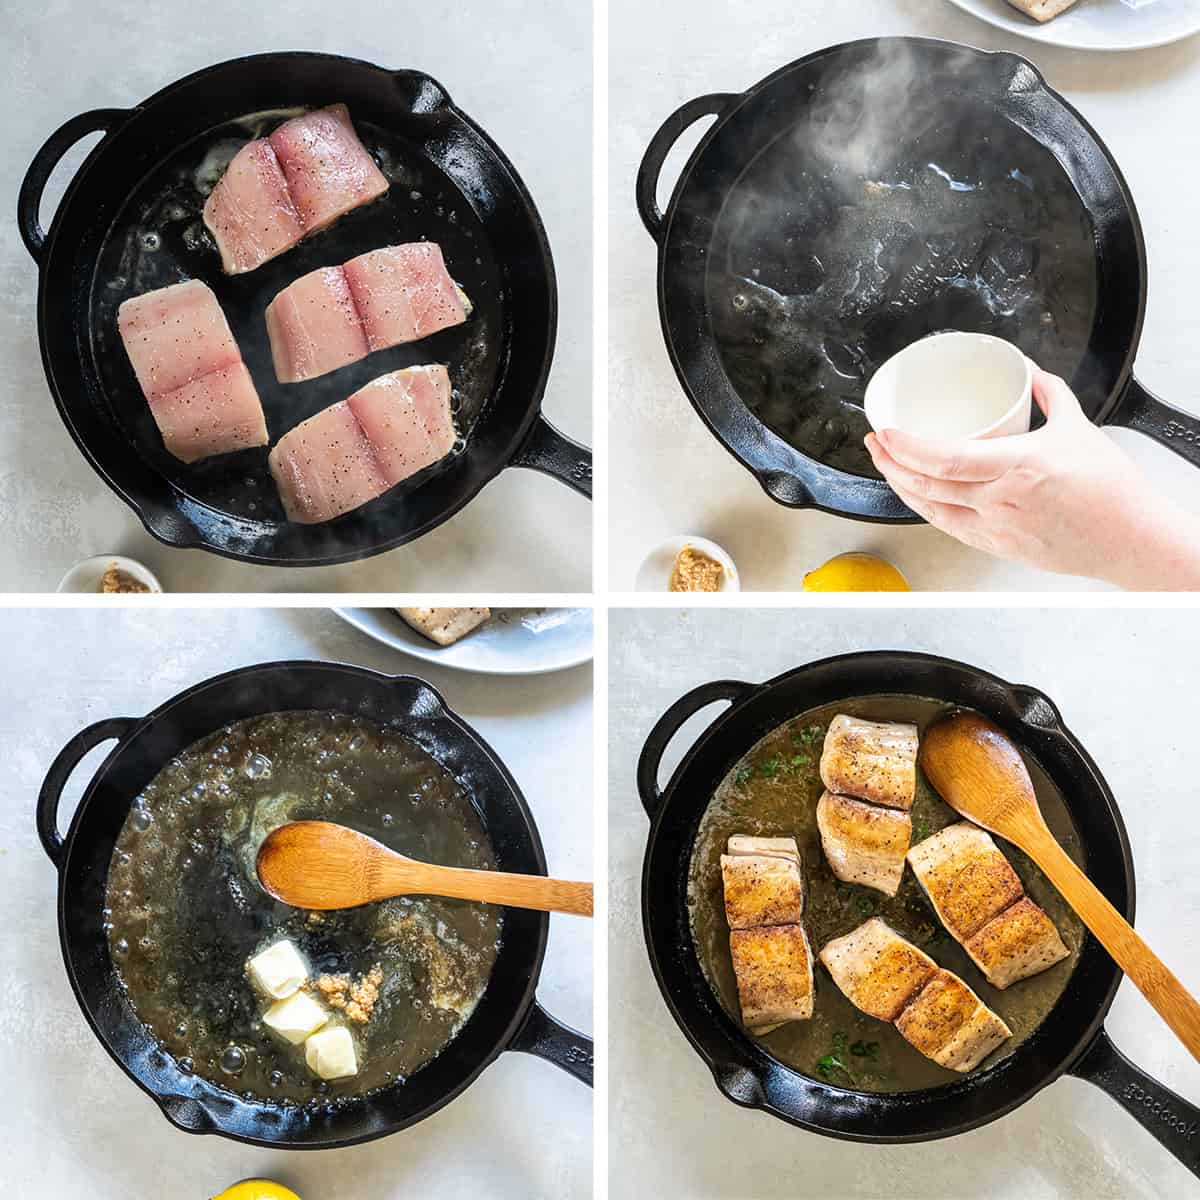 Four images showing mahi mahi fillets in a cast iron skillet, lemon butter sauce is made, and the fish is returned to the skillet with the sauce.